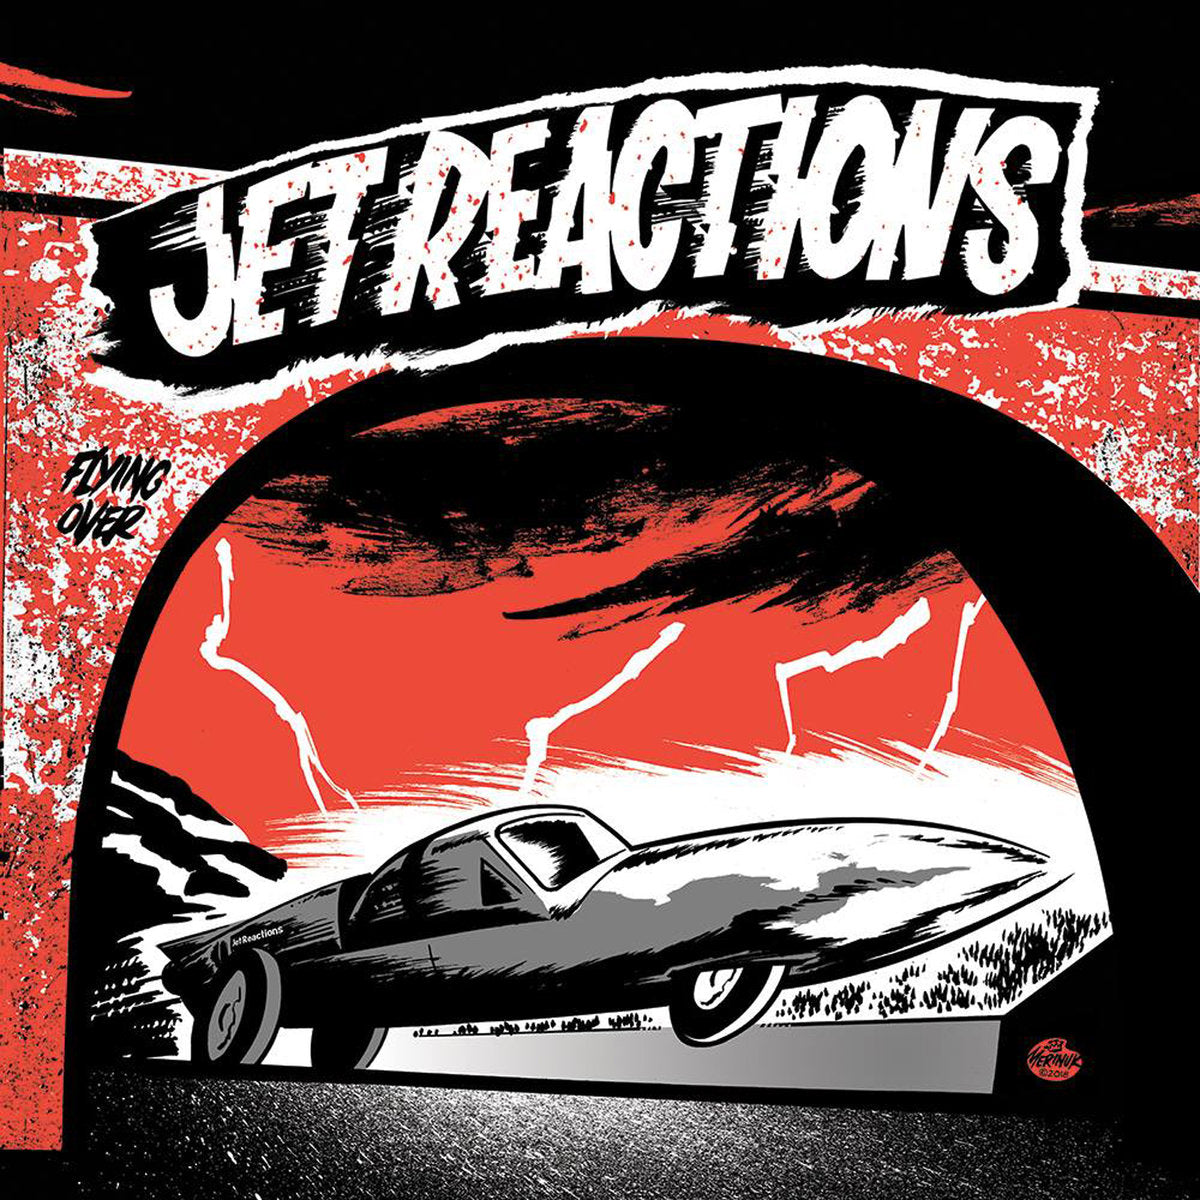 Jet Reactions- More Reaction 7” ~EX FLYING OVER / TV KILLERS!